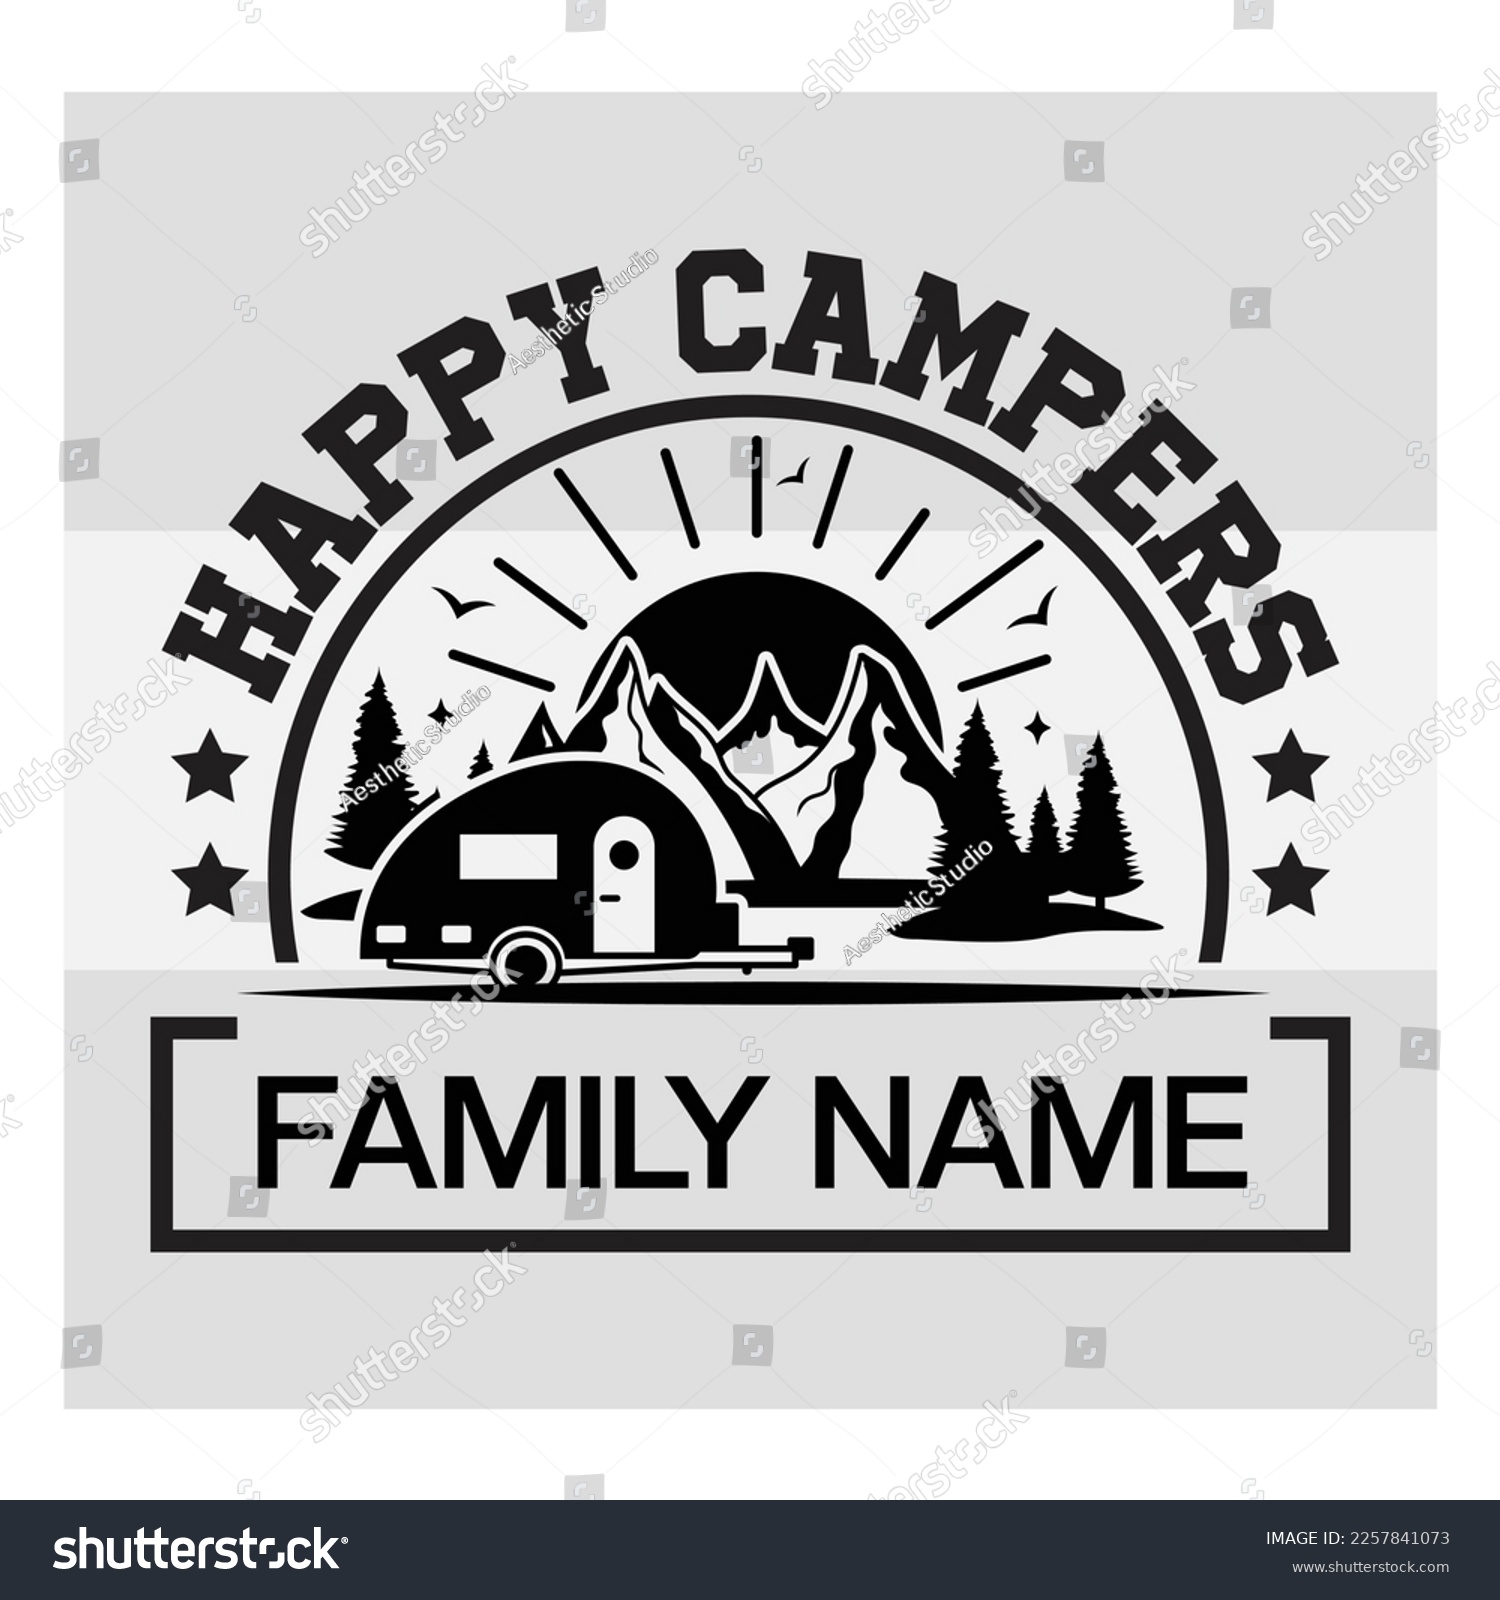 SVG of Happy Campers, Happy Campers Svg, Camper, Adventure, Camp Life, Camping Svg, Typography, Camping Quotes, Funny Camping, Camping T-shirt Design, SVG, EPS, Outdoor svg